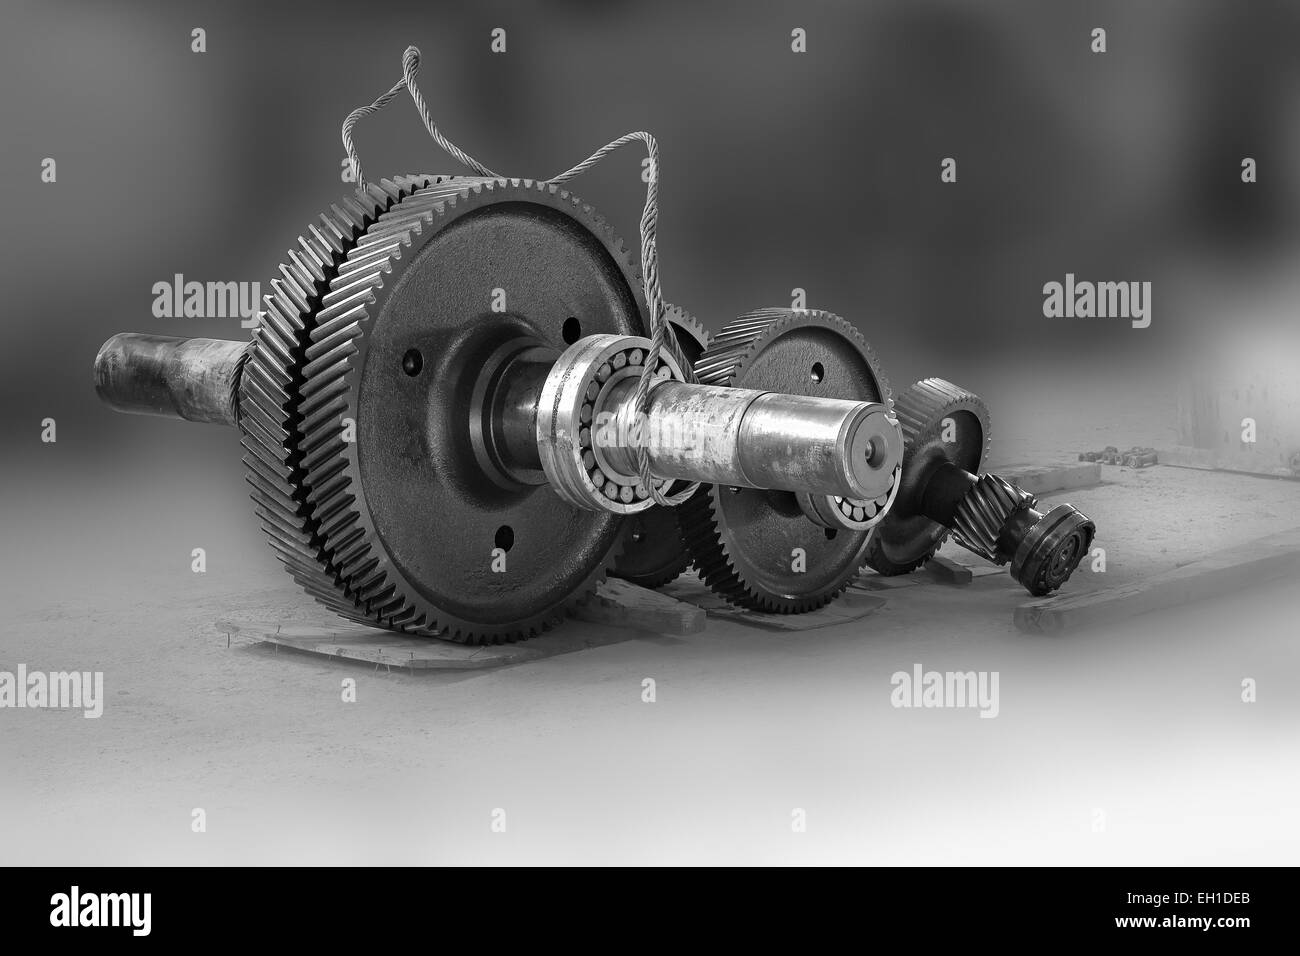 Automatic Open Gear Box for Truck. Automotive Transmission Repair and  Maintenance Services, Backgroung, Texture Stock Image - Image of gearbox,  mechanical: 169969451